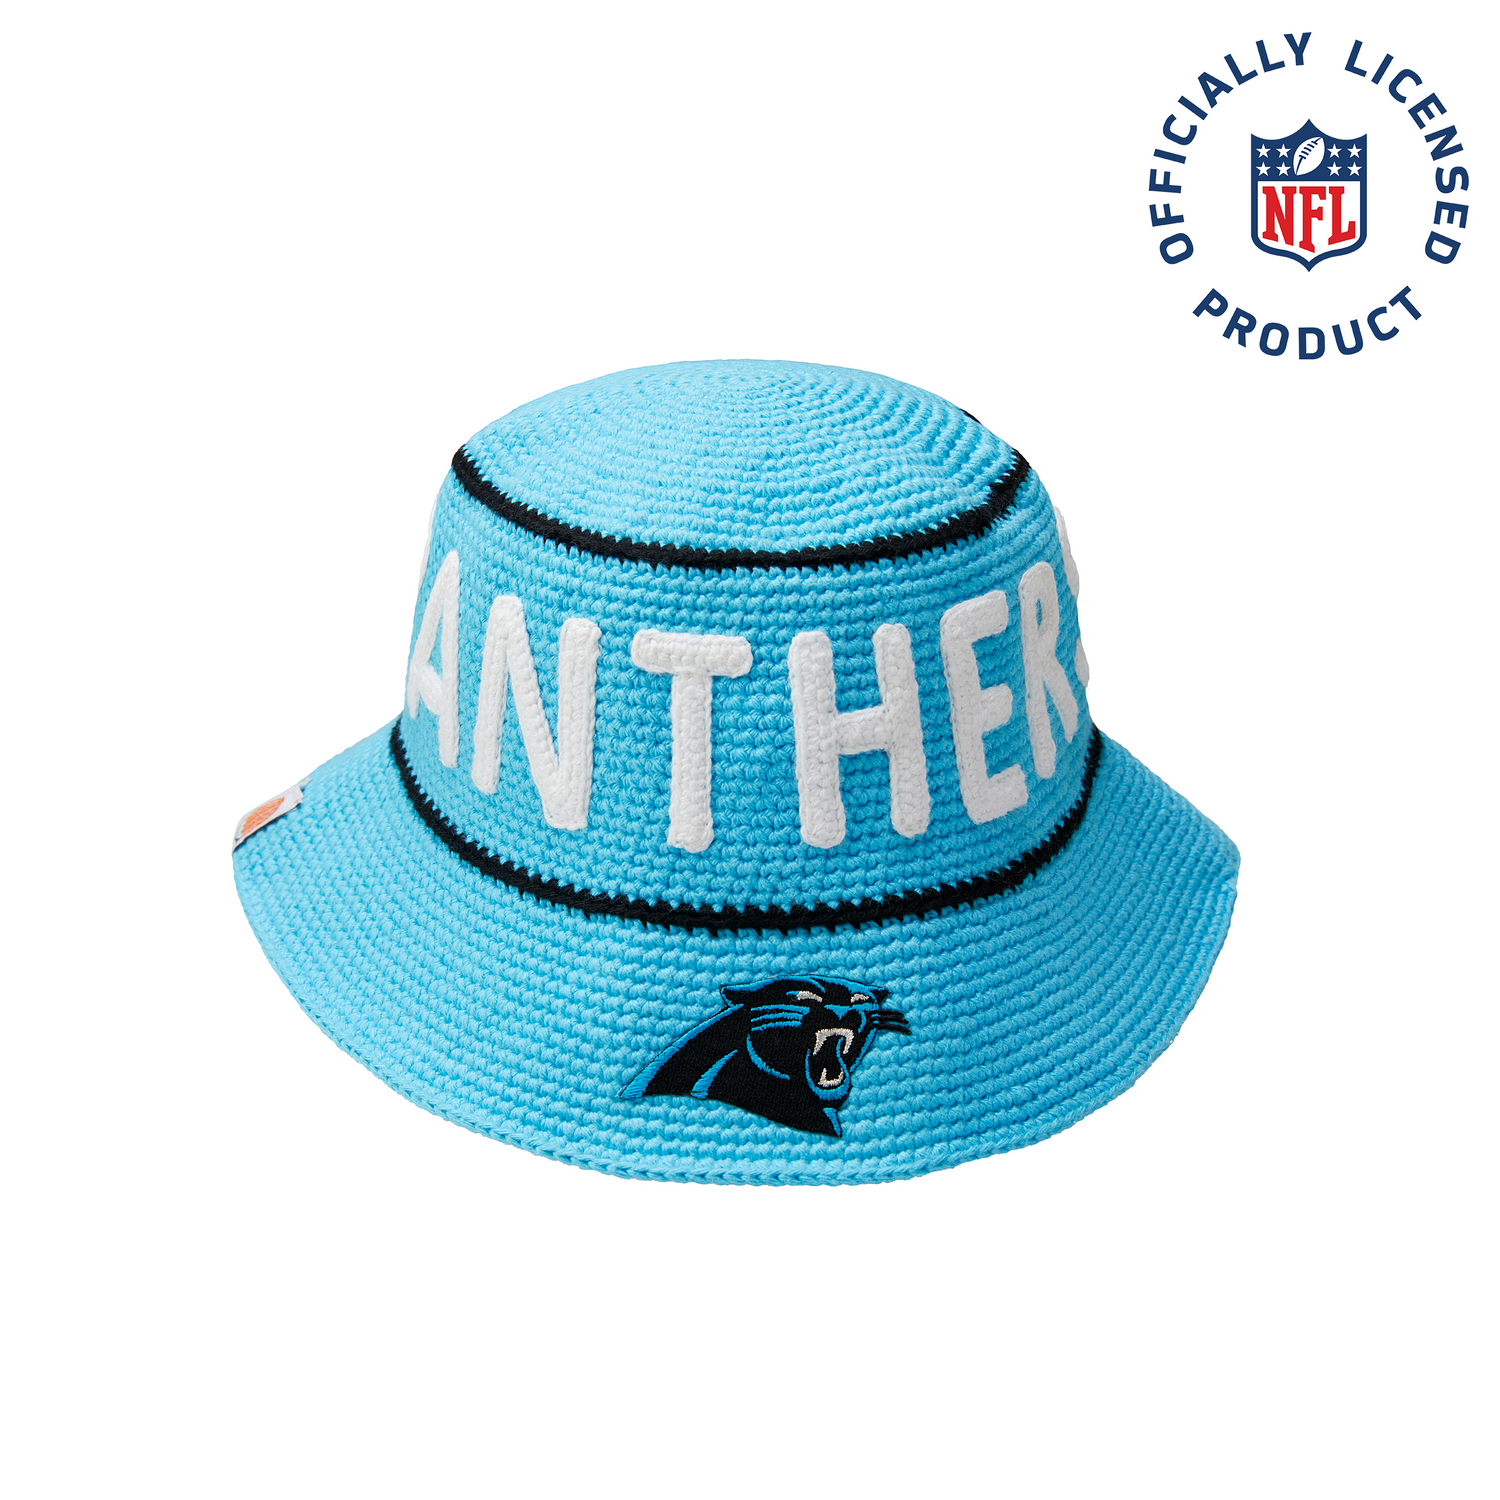 The Panthers NFL Bucket Hat